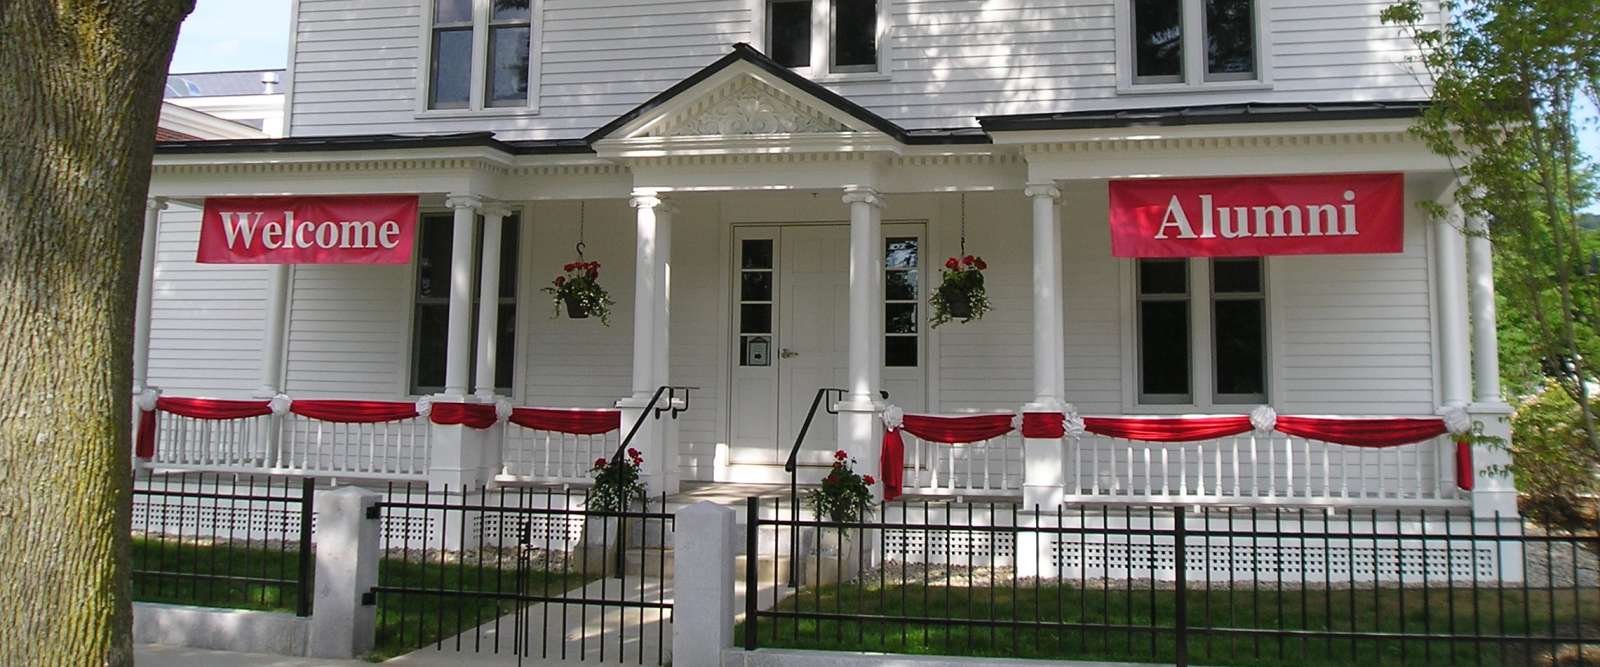 Alumni house, with welcome banner